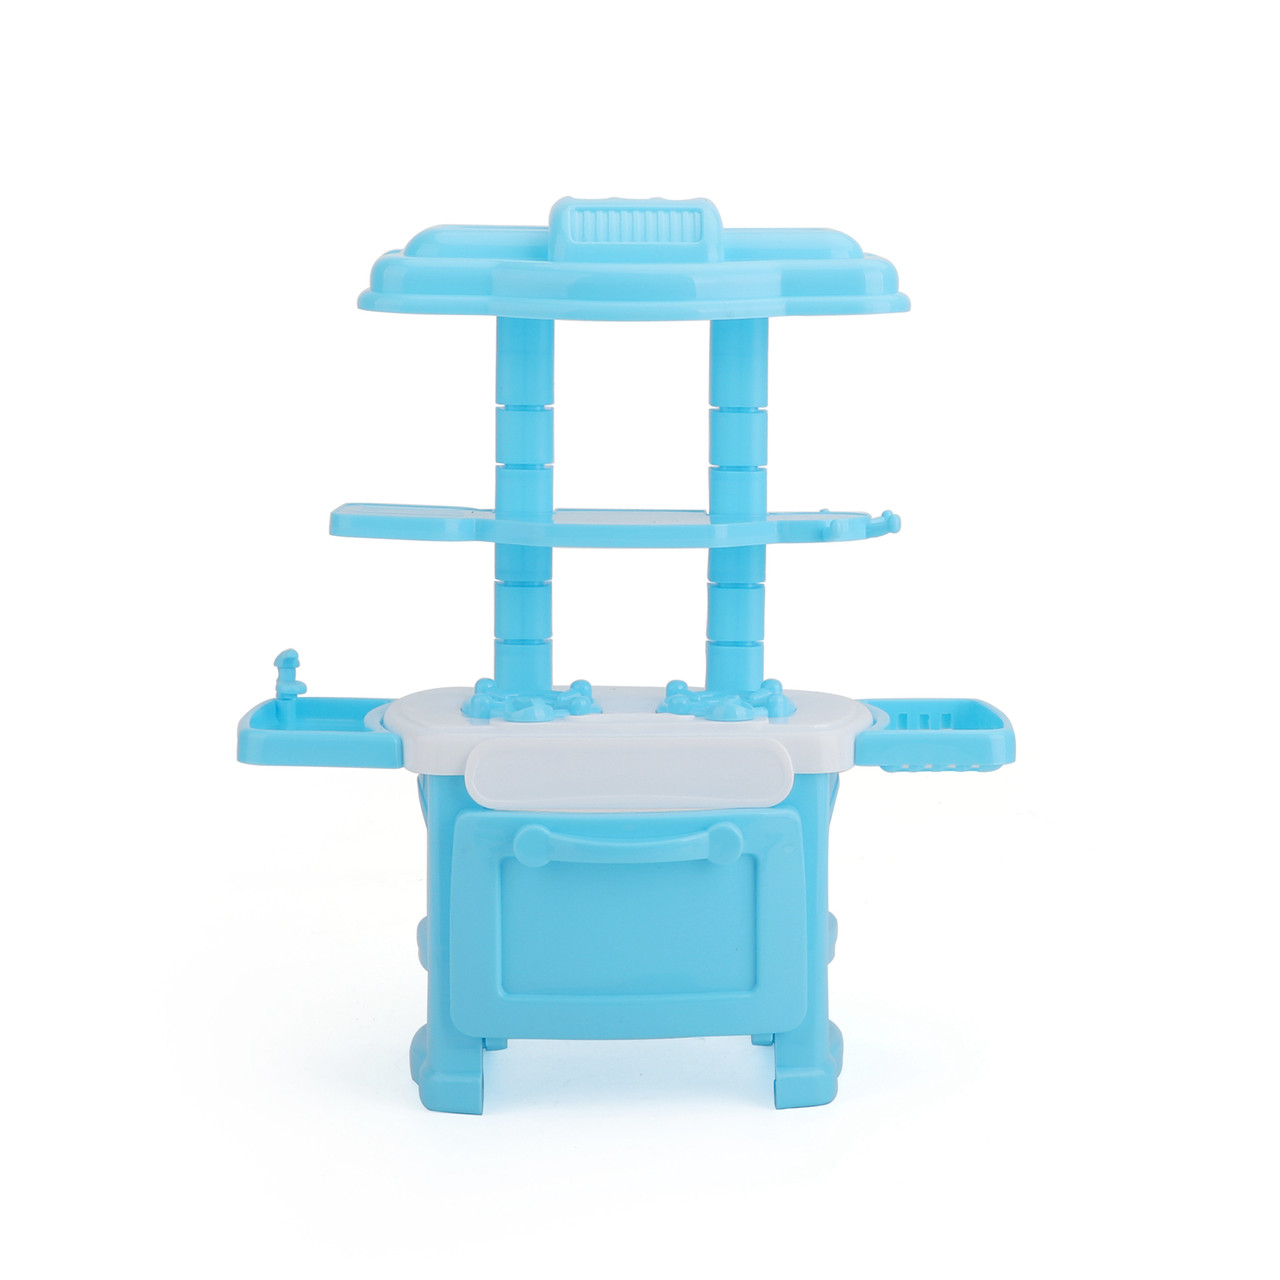 Plastic Kitchen Toy Kids Cooking Pretend Play Set Toddler Playset Toy Gift Blue